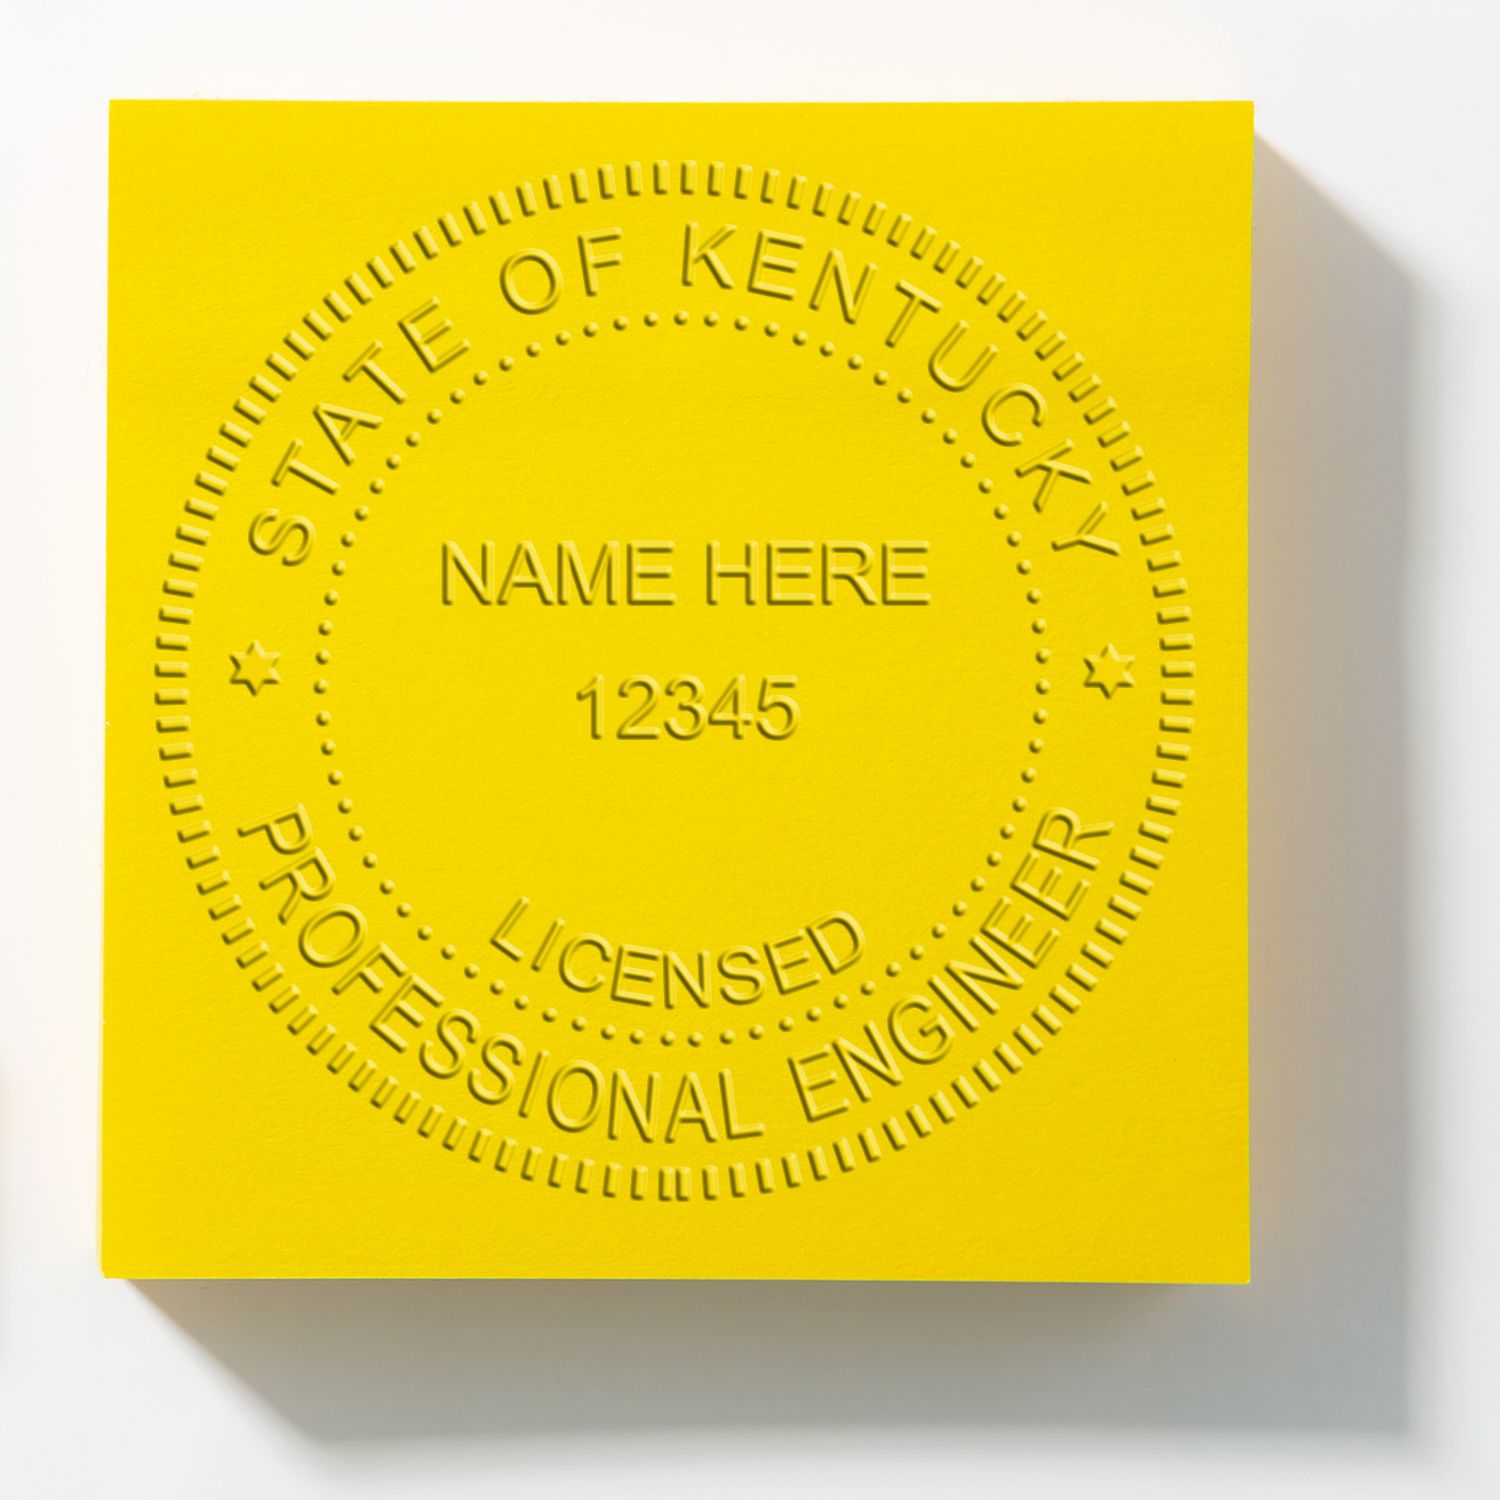 The main image for the State of Kentucky Extended Long Reach Engineer Seal depicting a sample of the imprint and electronic files